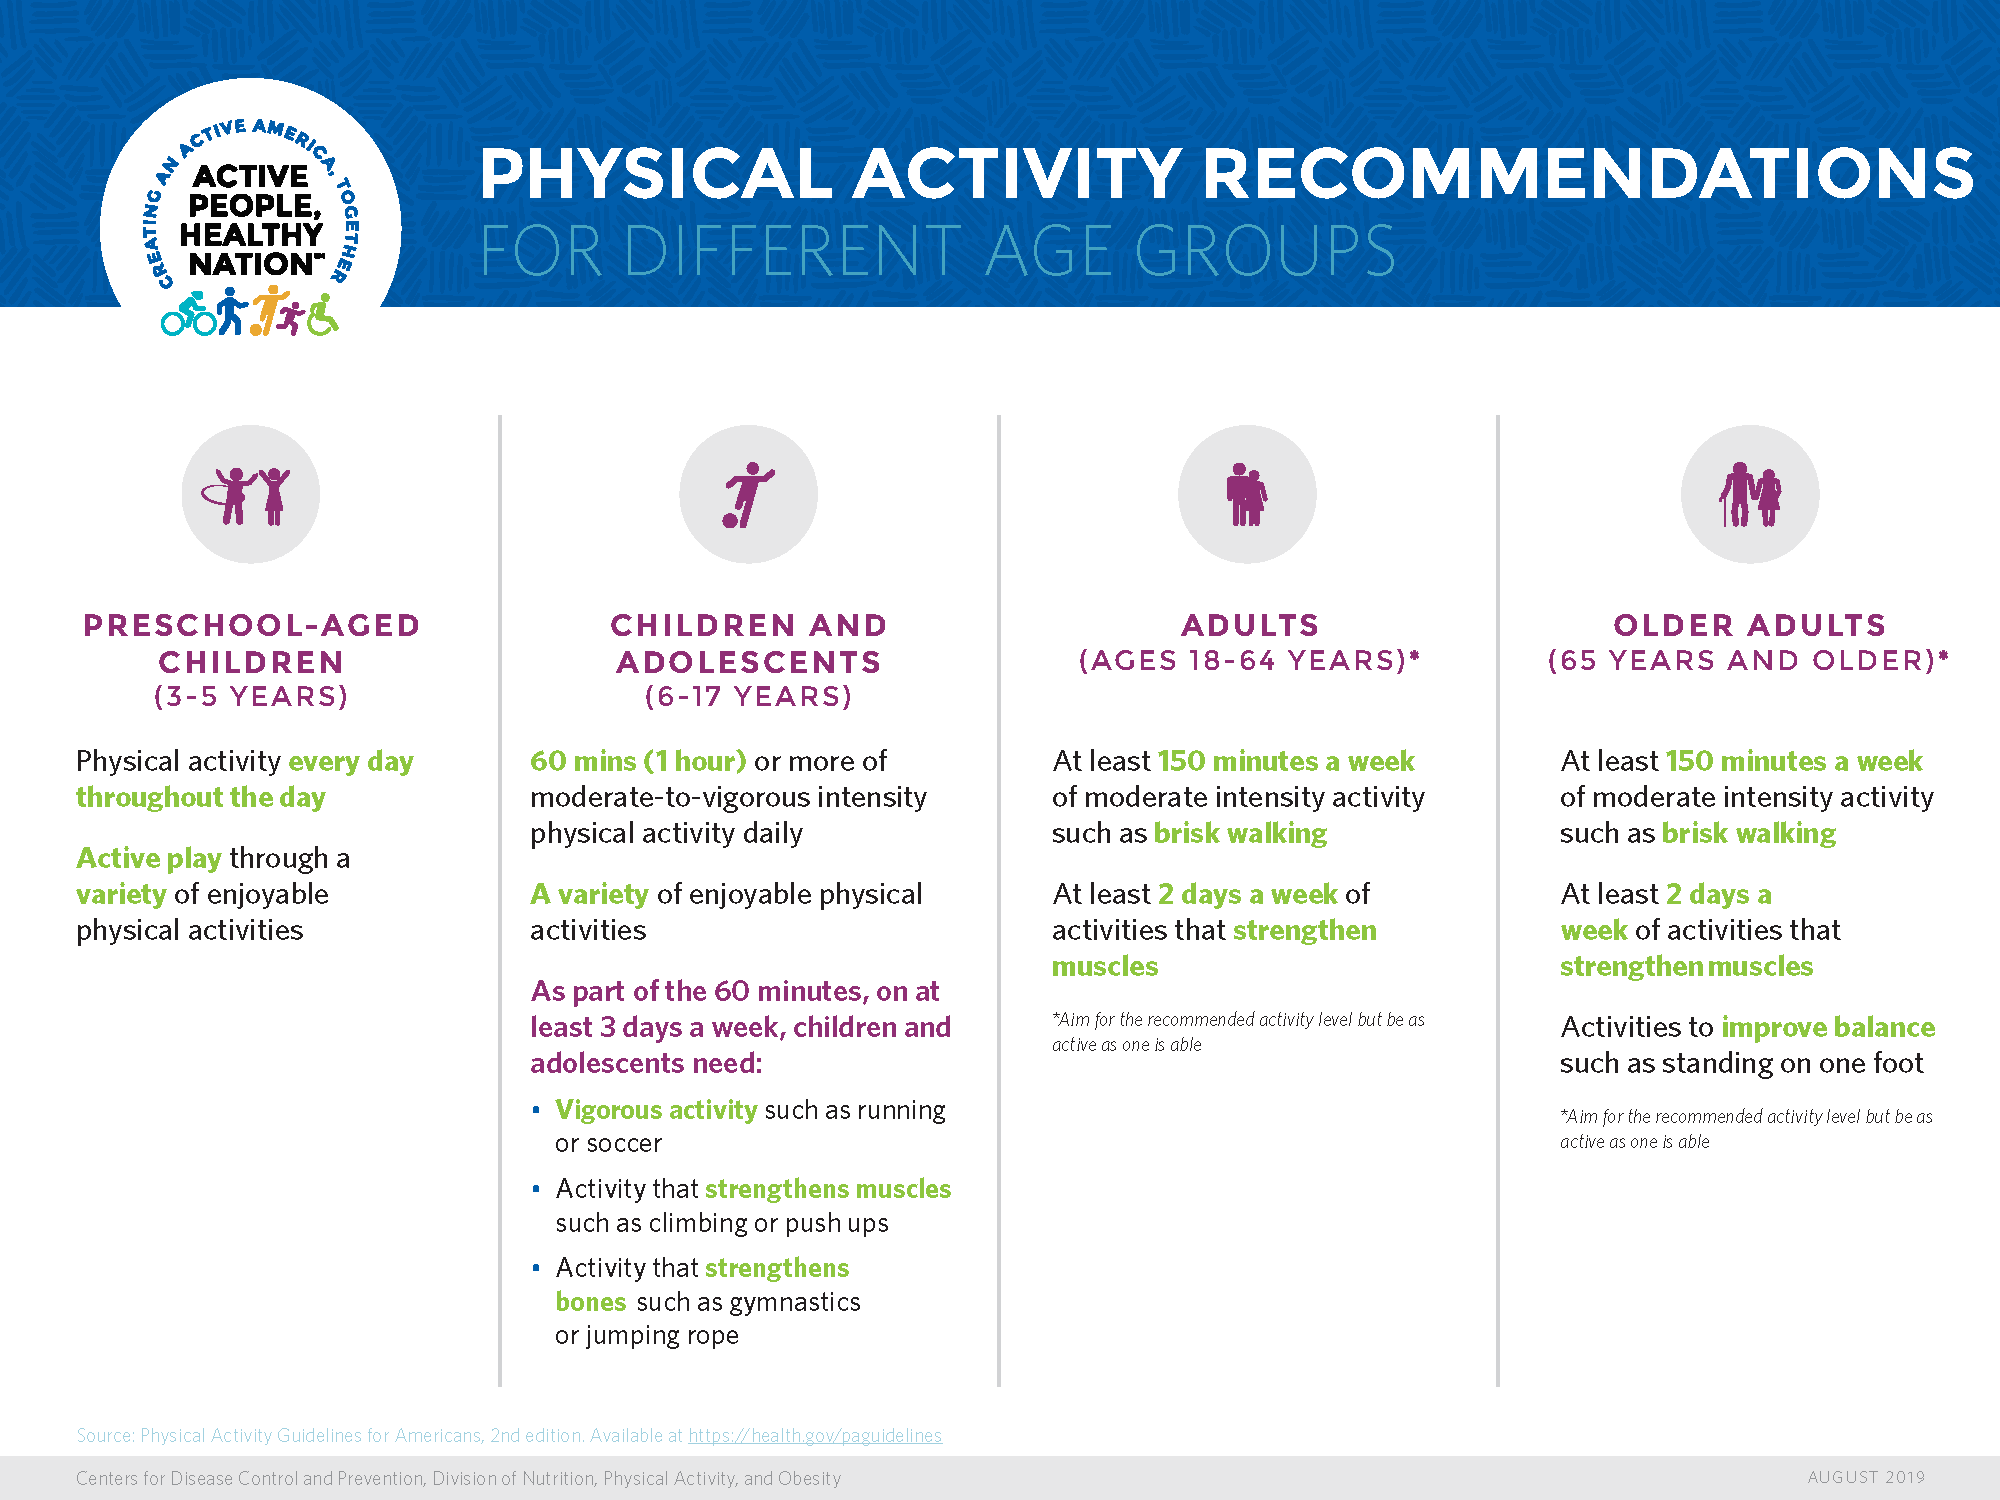 A sample of exercises recommended by National Health Services in